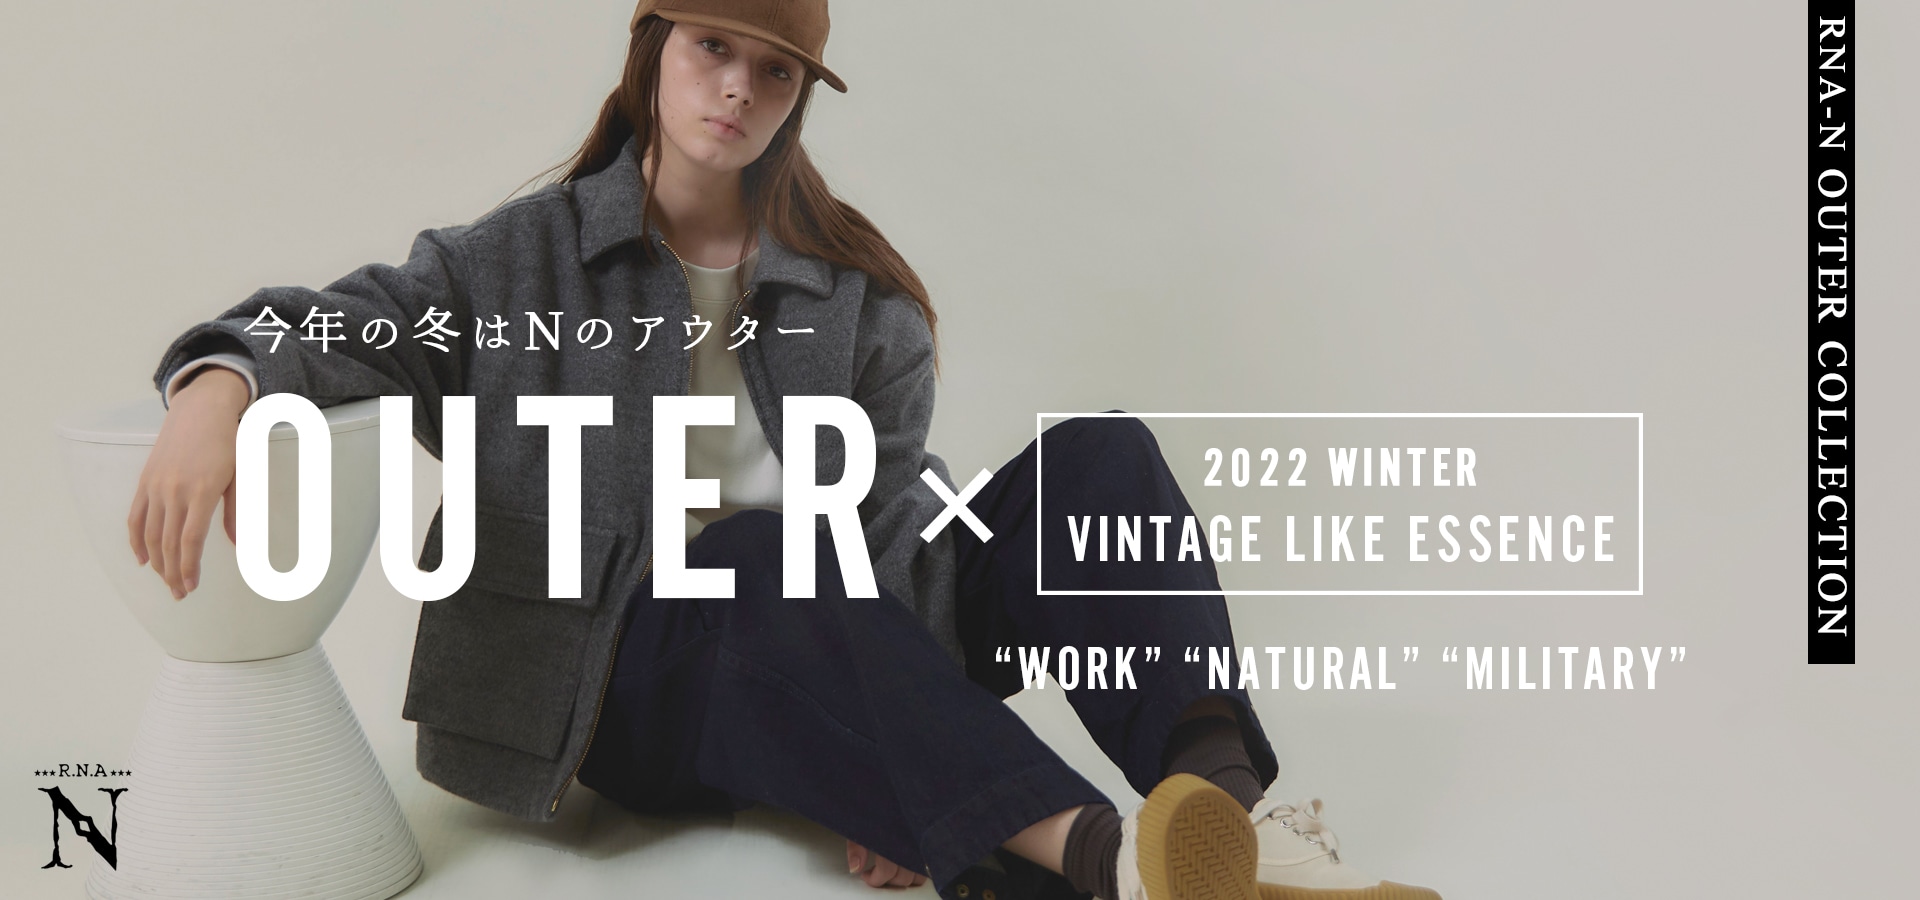 RNA-N OUTER COLLECTION - RNA ONLINE STORE | アールエヌエー公式通販